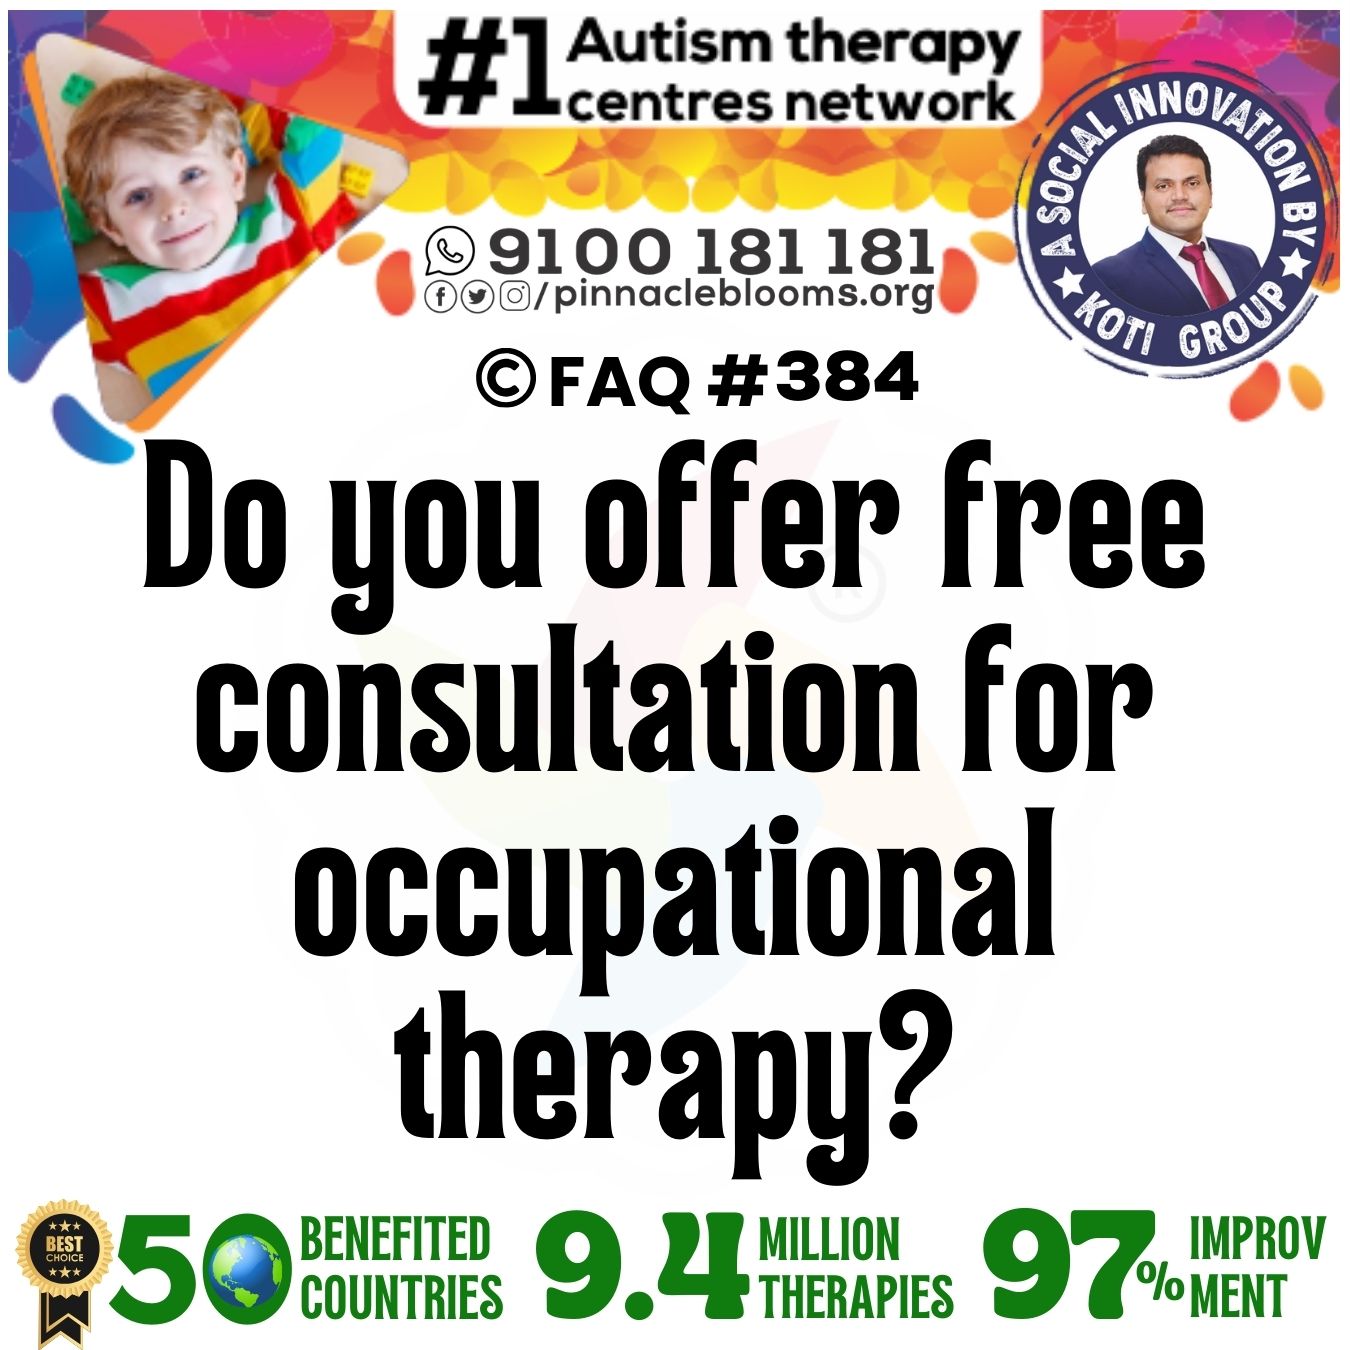 Do you offer free consultation for occupational therapy?